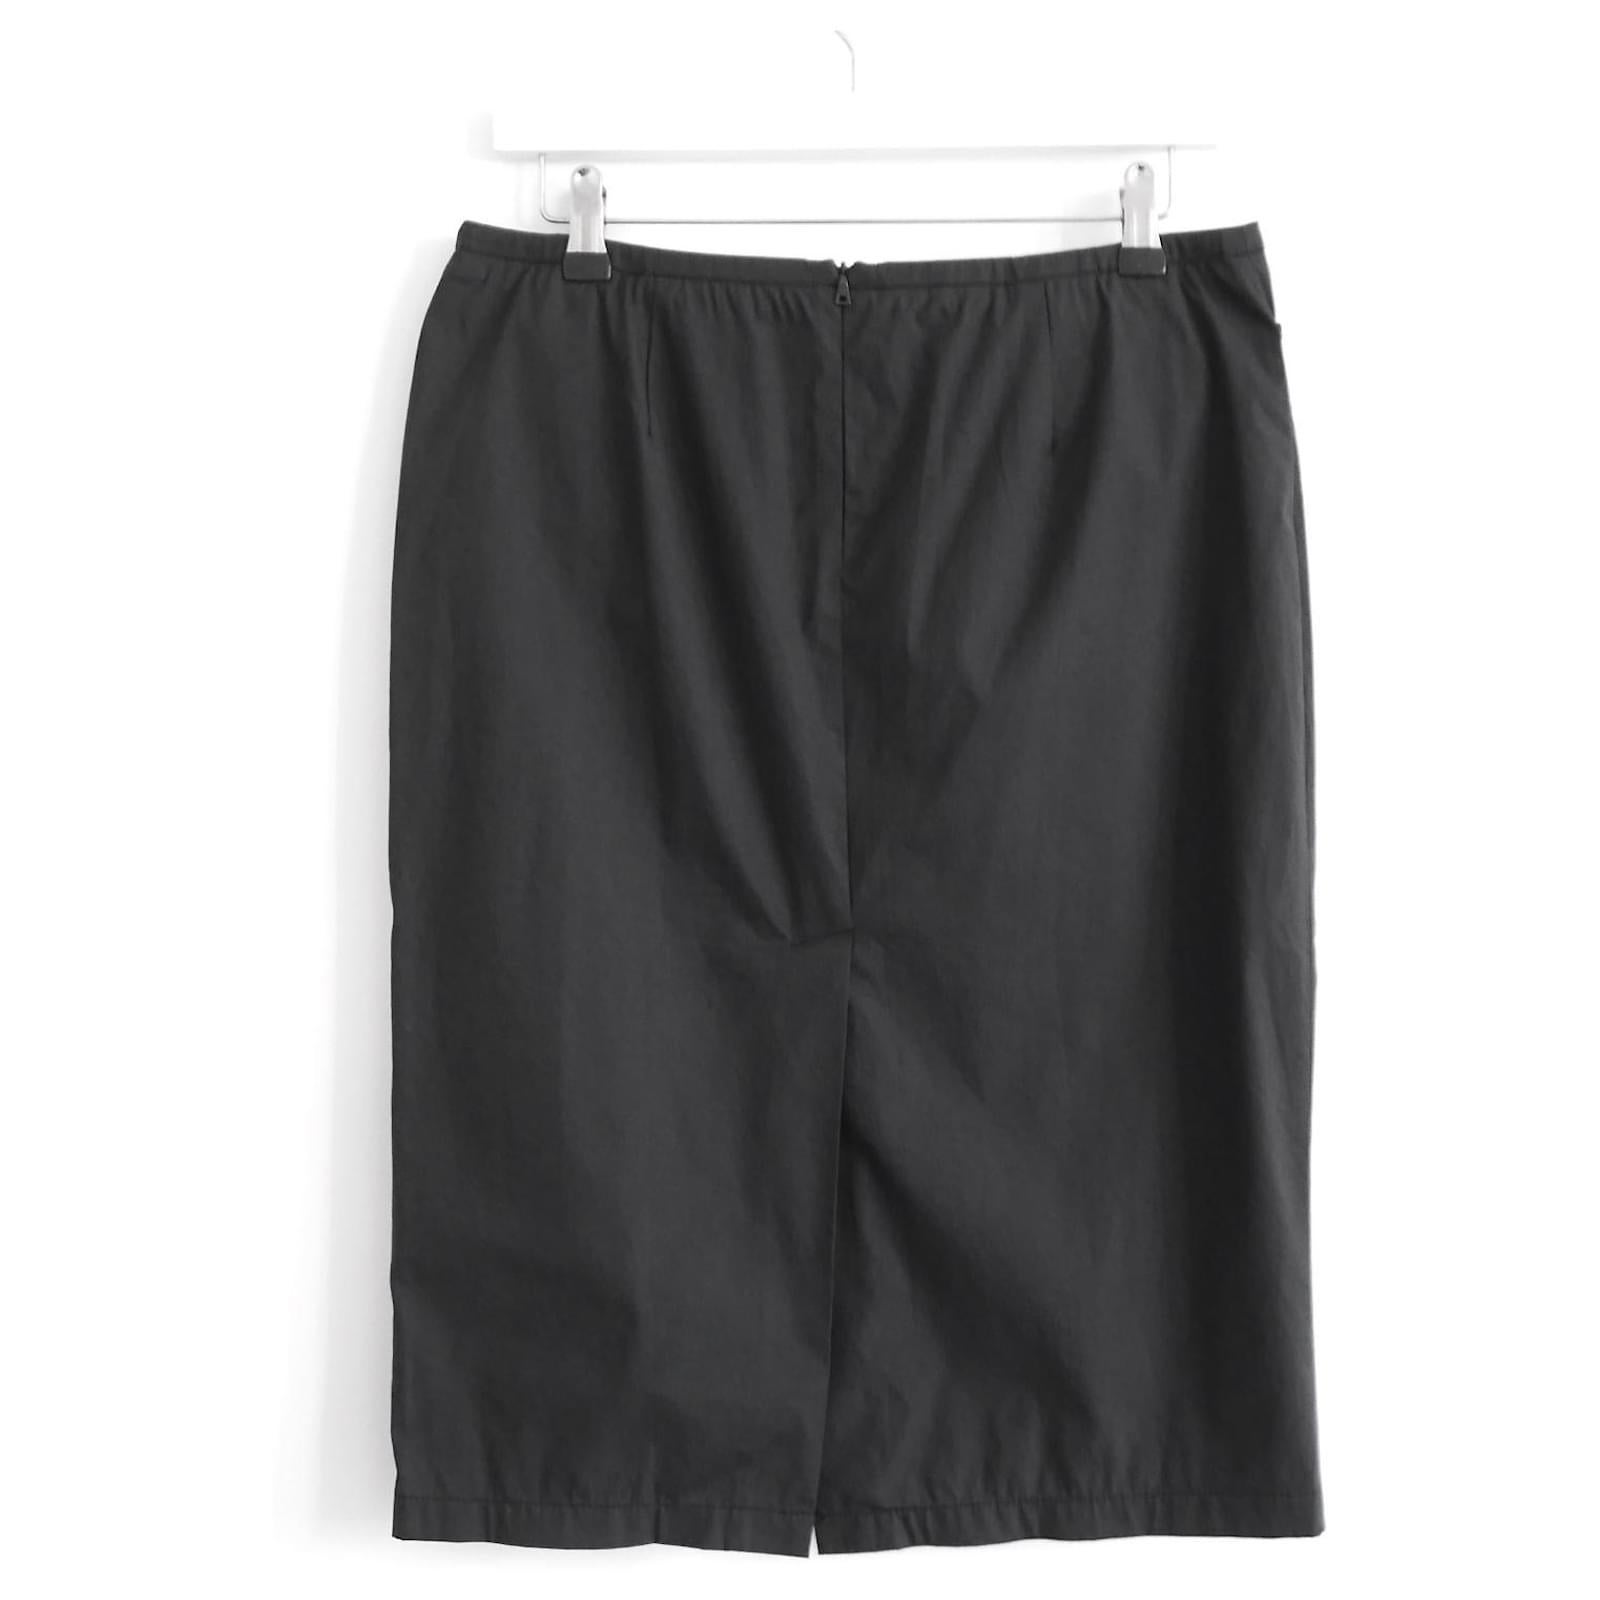 Super rare, new with tags archival Prada Linea Rossa (or Prada Sport) skirt from the 2000S. Made from crisp, vintage black cotton and nylon, it has a classic pencil cut with waist pockets and back slit. Has concealed back zipper with little Prada